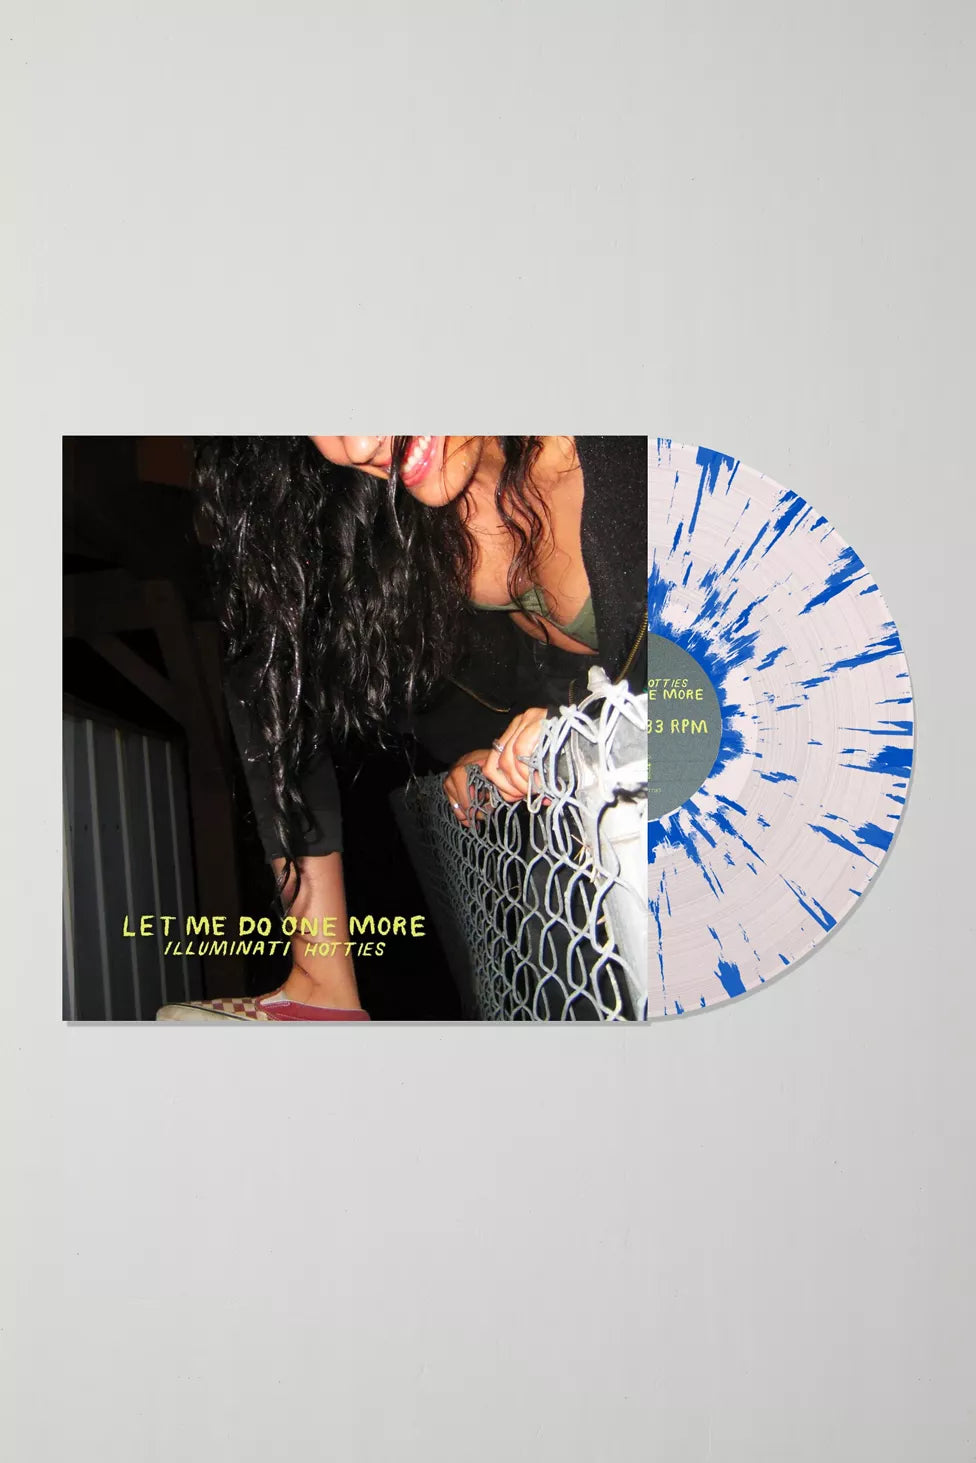 illuminati hotties - Let Me Do One More Limited LP